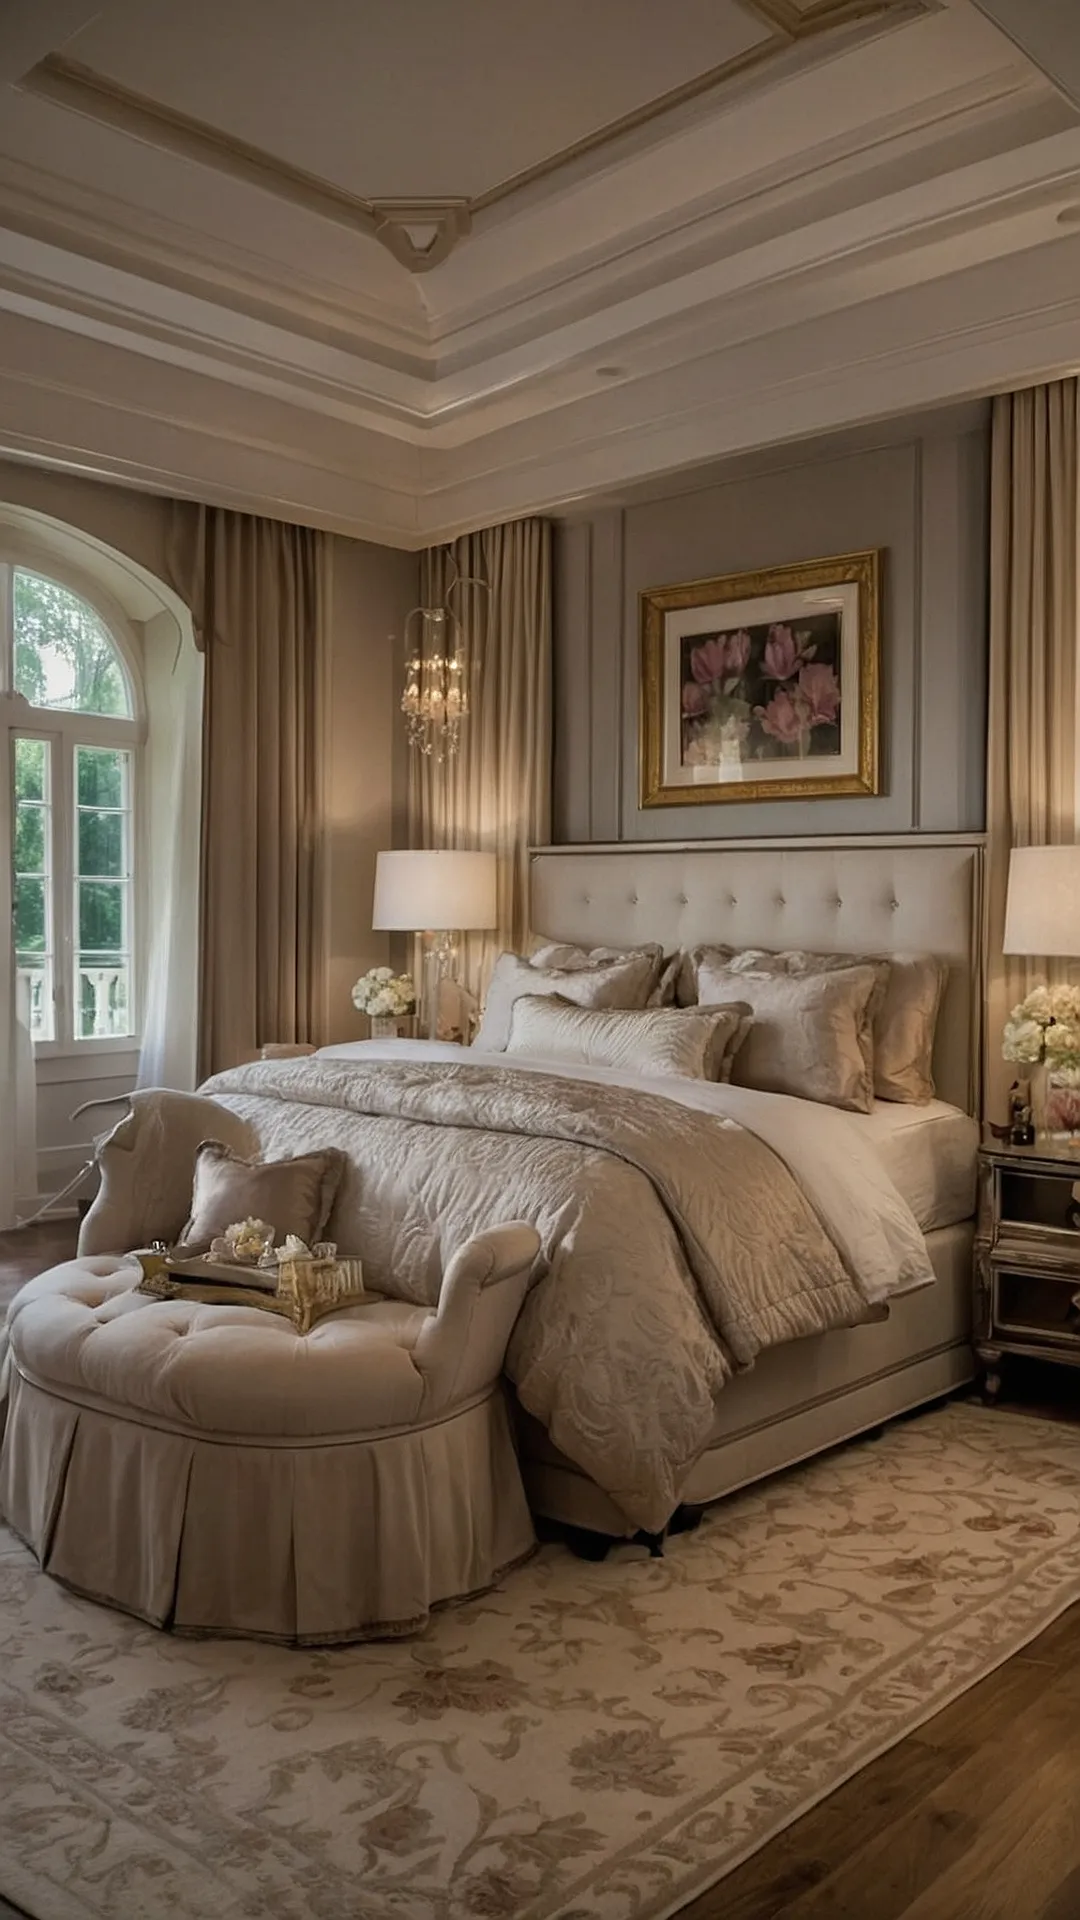 Couture Chambers: Classy Bedroom Concepts